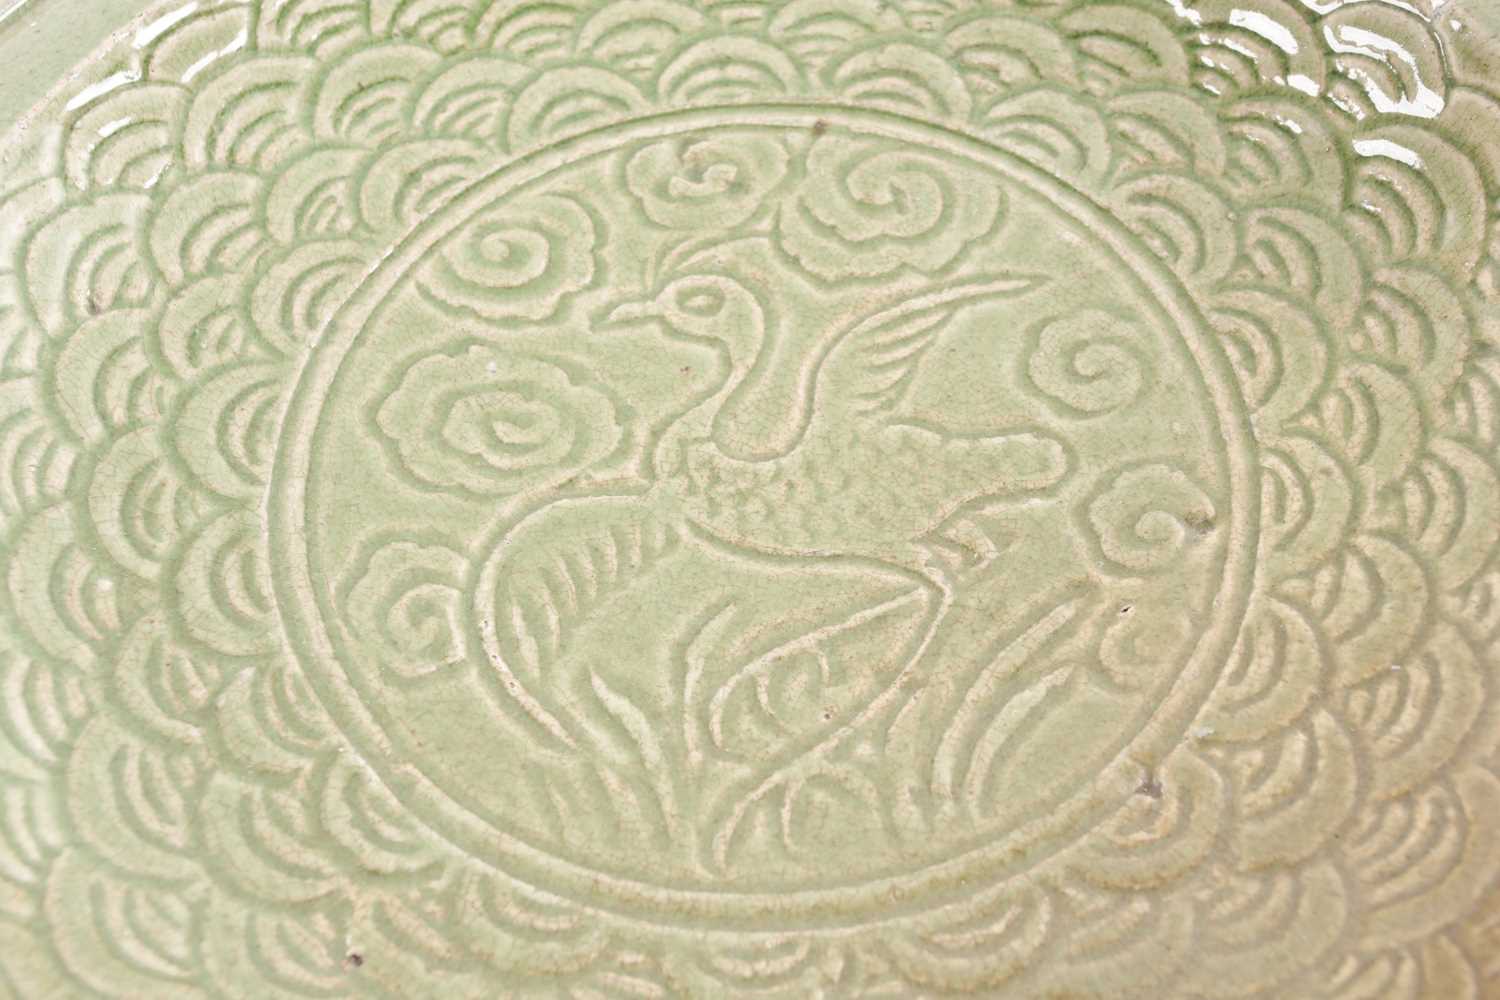 A circular celadon charger carved with a bird on a field of clouds within a stylized wave border - Image 4 of 5